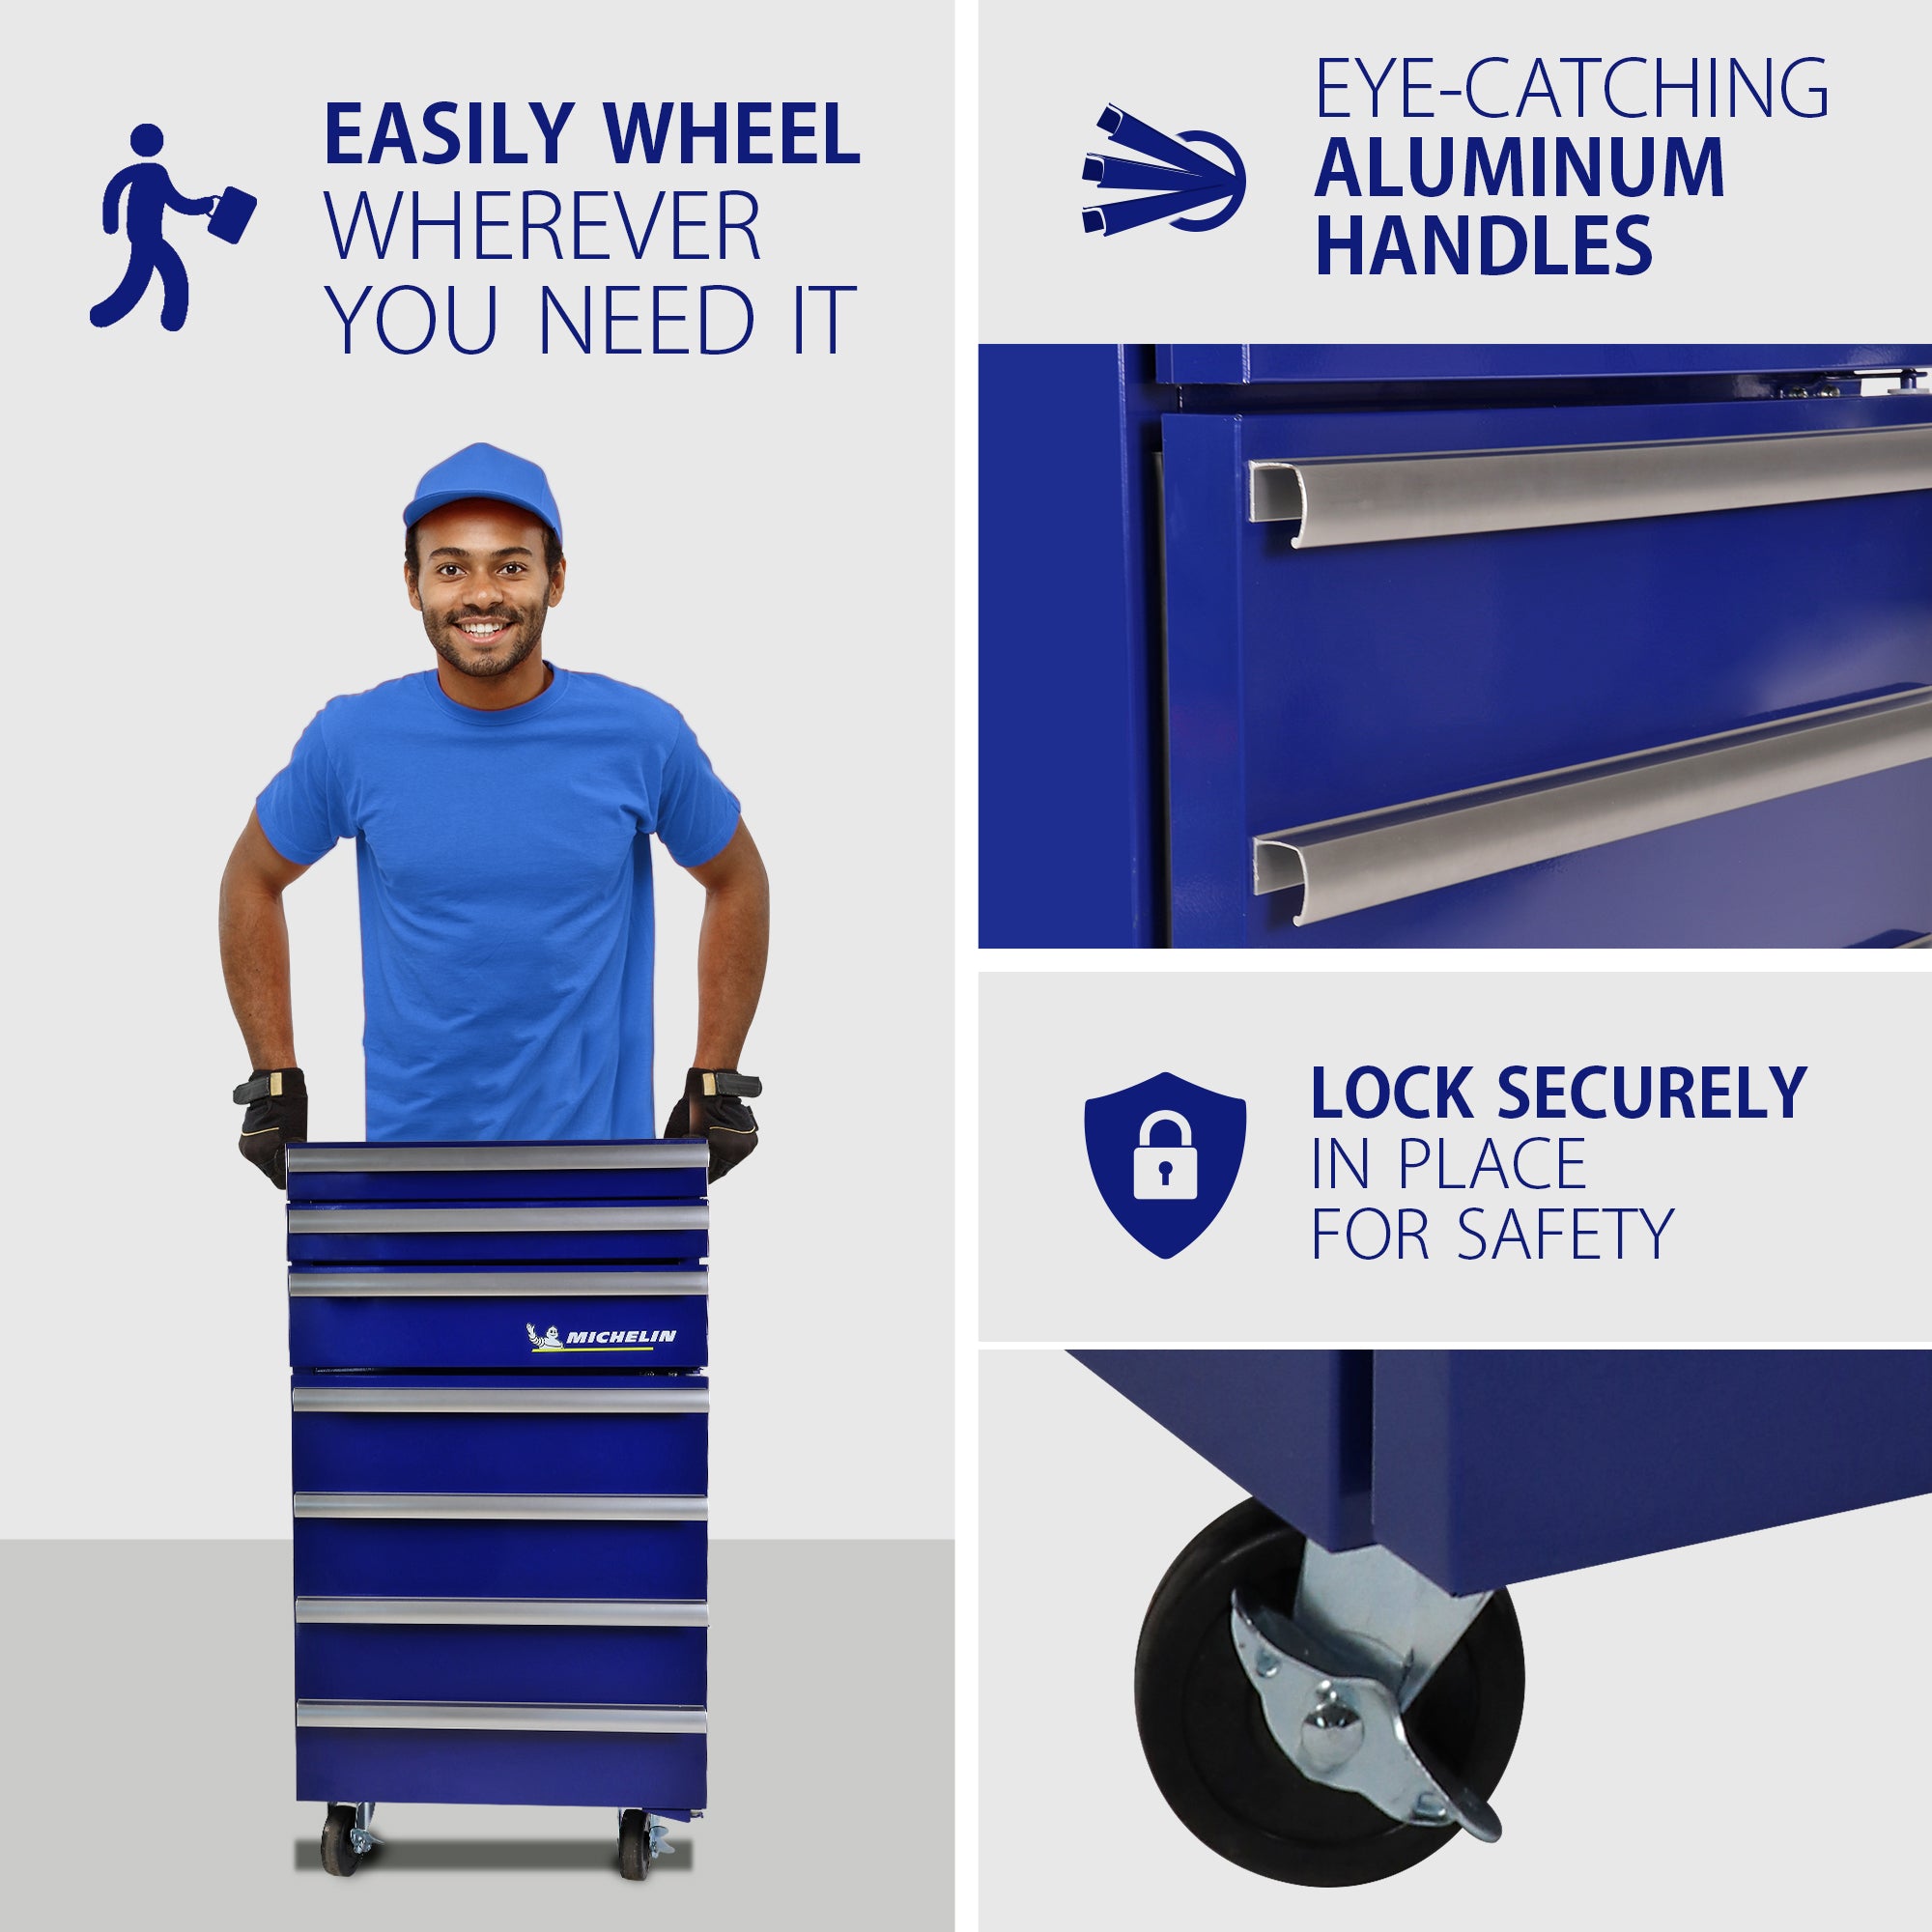 Left side shows a picture of a person with brown skin and short black hair and beard wearing a bright blue t-shirt and hat and black work gloves standing behind the toolchest fridge and holding onto the sides. Text above reads, "Easily wheel wherever you need it. Right side shows two closeup images, labeled, of the eye-catching aluminum handles and swivel wheels that lock securely in place for safety.